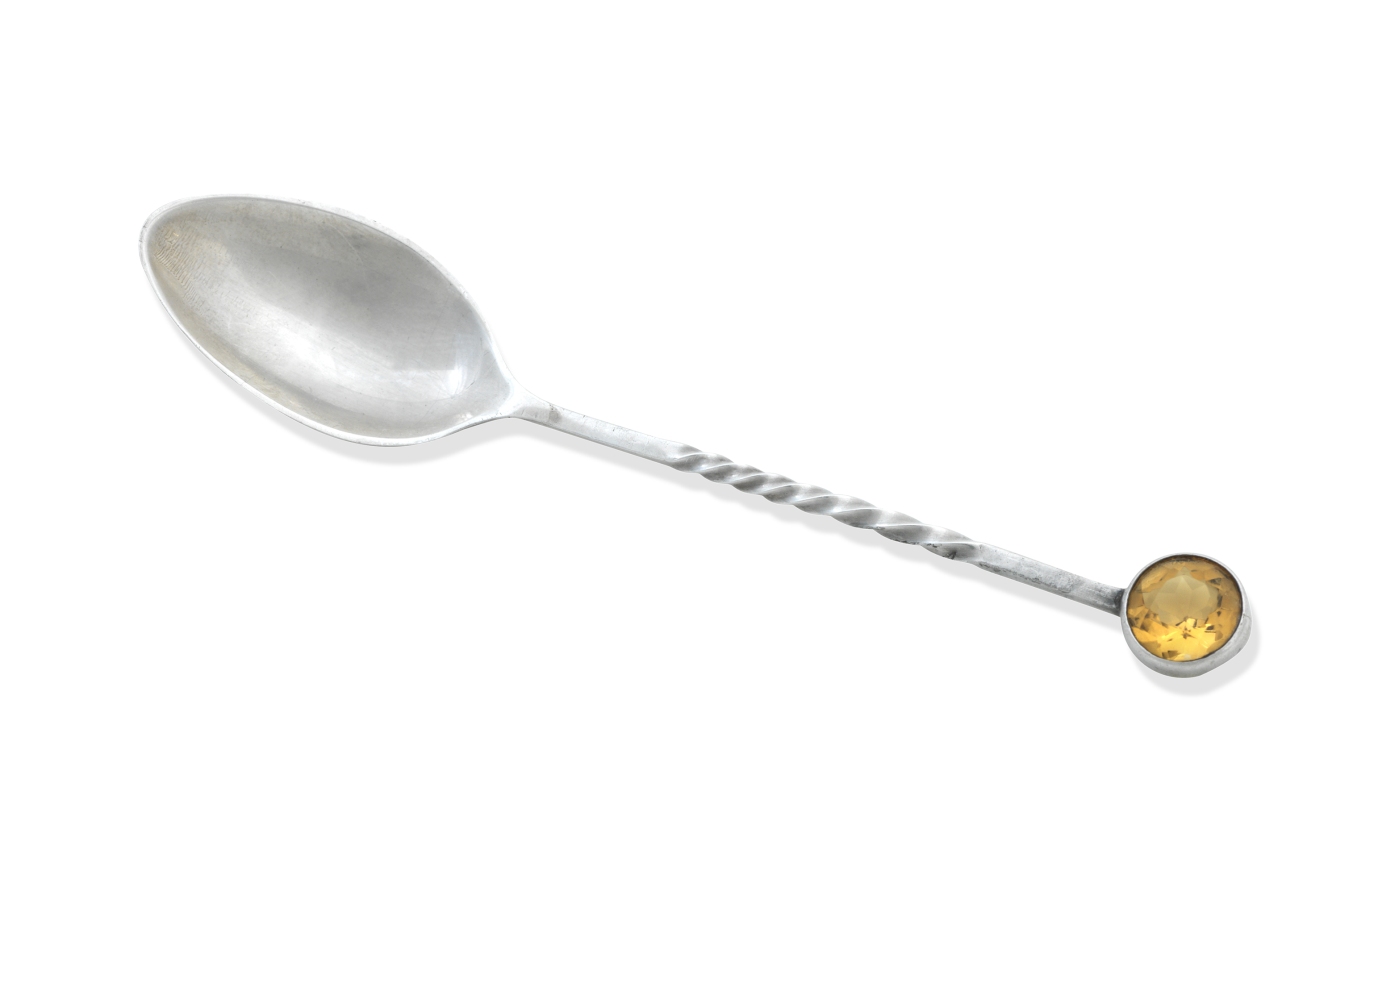 ROBB OF BALLATER, A CITRINE-SET SPOON WR, BLTR, and with hallmarks for Edinburgh, 1927